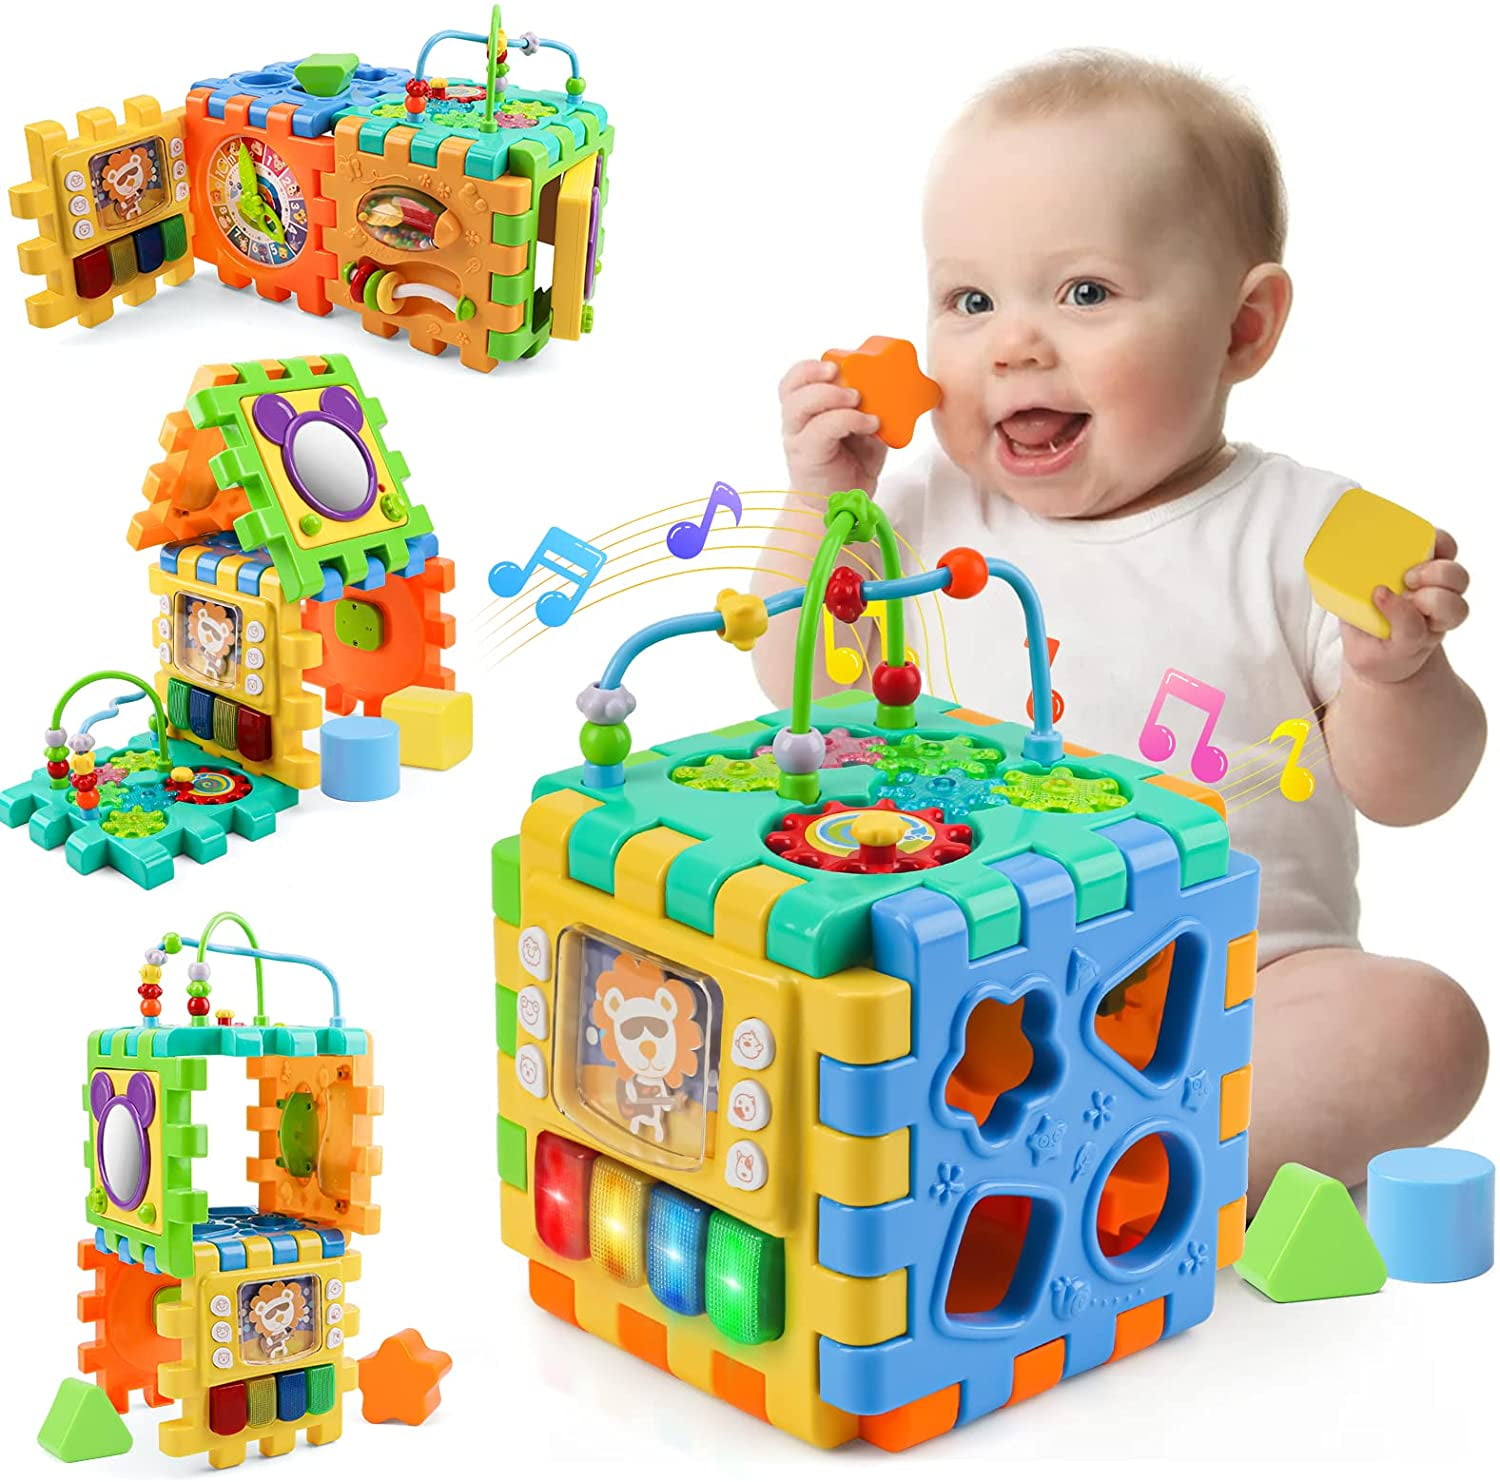 Baby Activity Cube Toy, 6 in 1 Multipurpose Play Center with Music ...